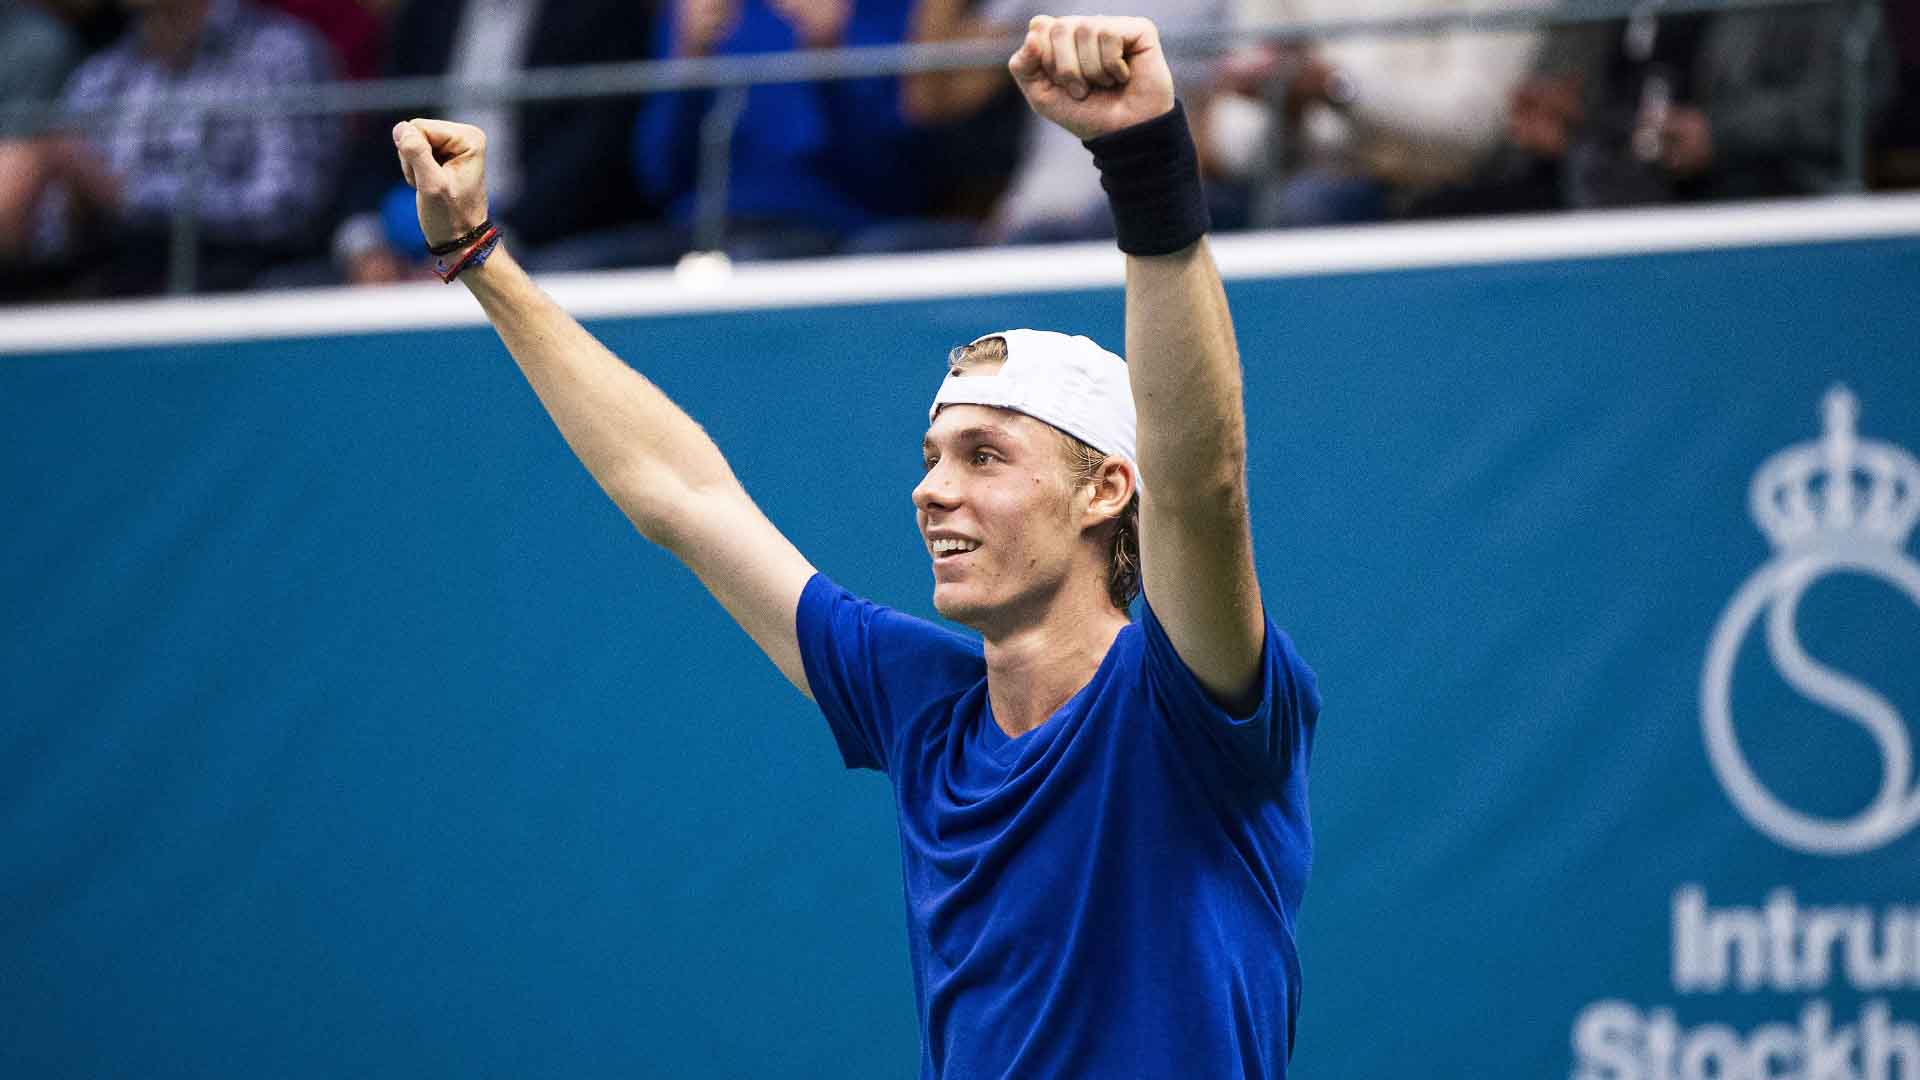 <a href='https://www.atptour.com/en/players/denis-shapovalov/su55/overview'>Denis Shapovalov</a> wins 93 per cent of first-serve points (28/30) to beat <a href='https://www.atptour.com/en/players/filip-krajinovic/kb05/overview'>Filip Krajinovic</a> in the Intrum <a href='https://www.atptour.com/en/tournaments/stockholm/429/overview'>Stockholm Open</a> final on Sunday.